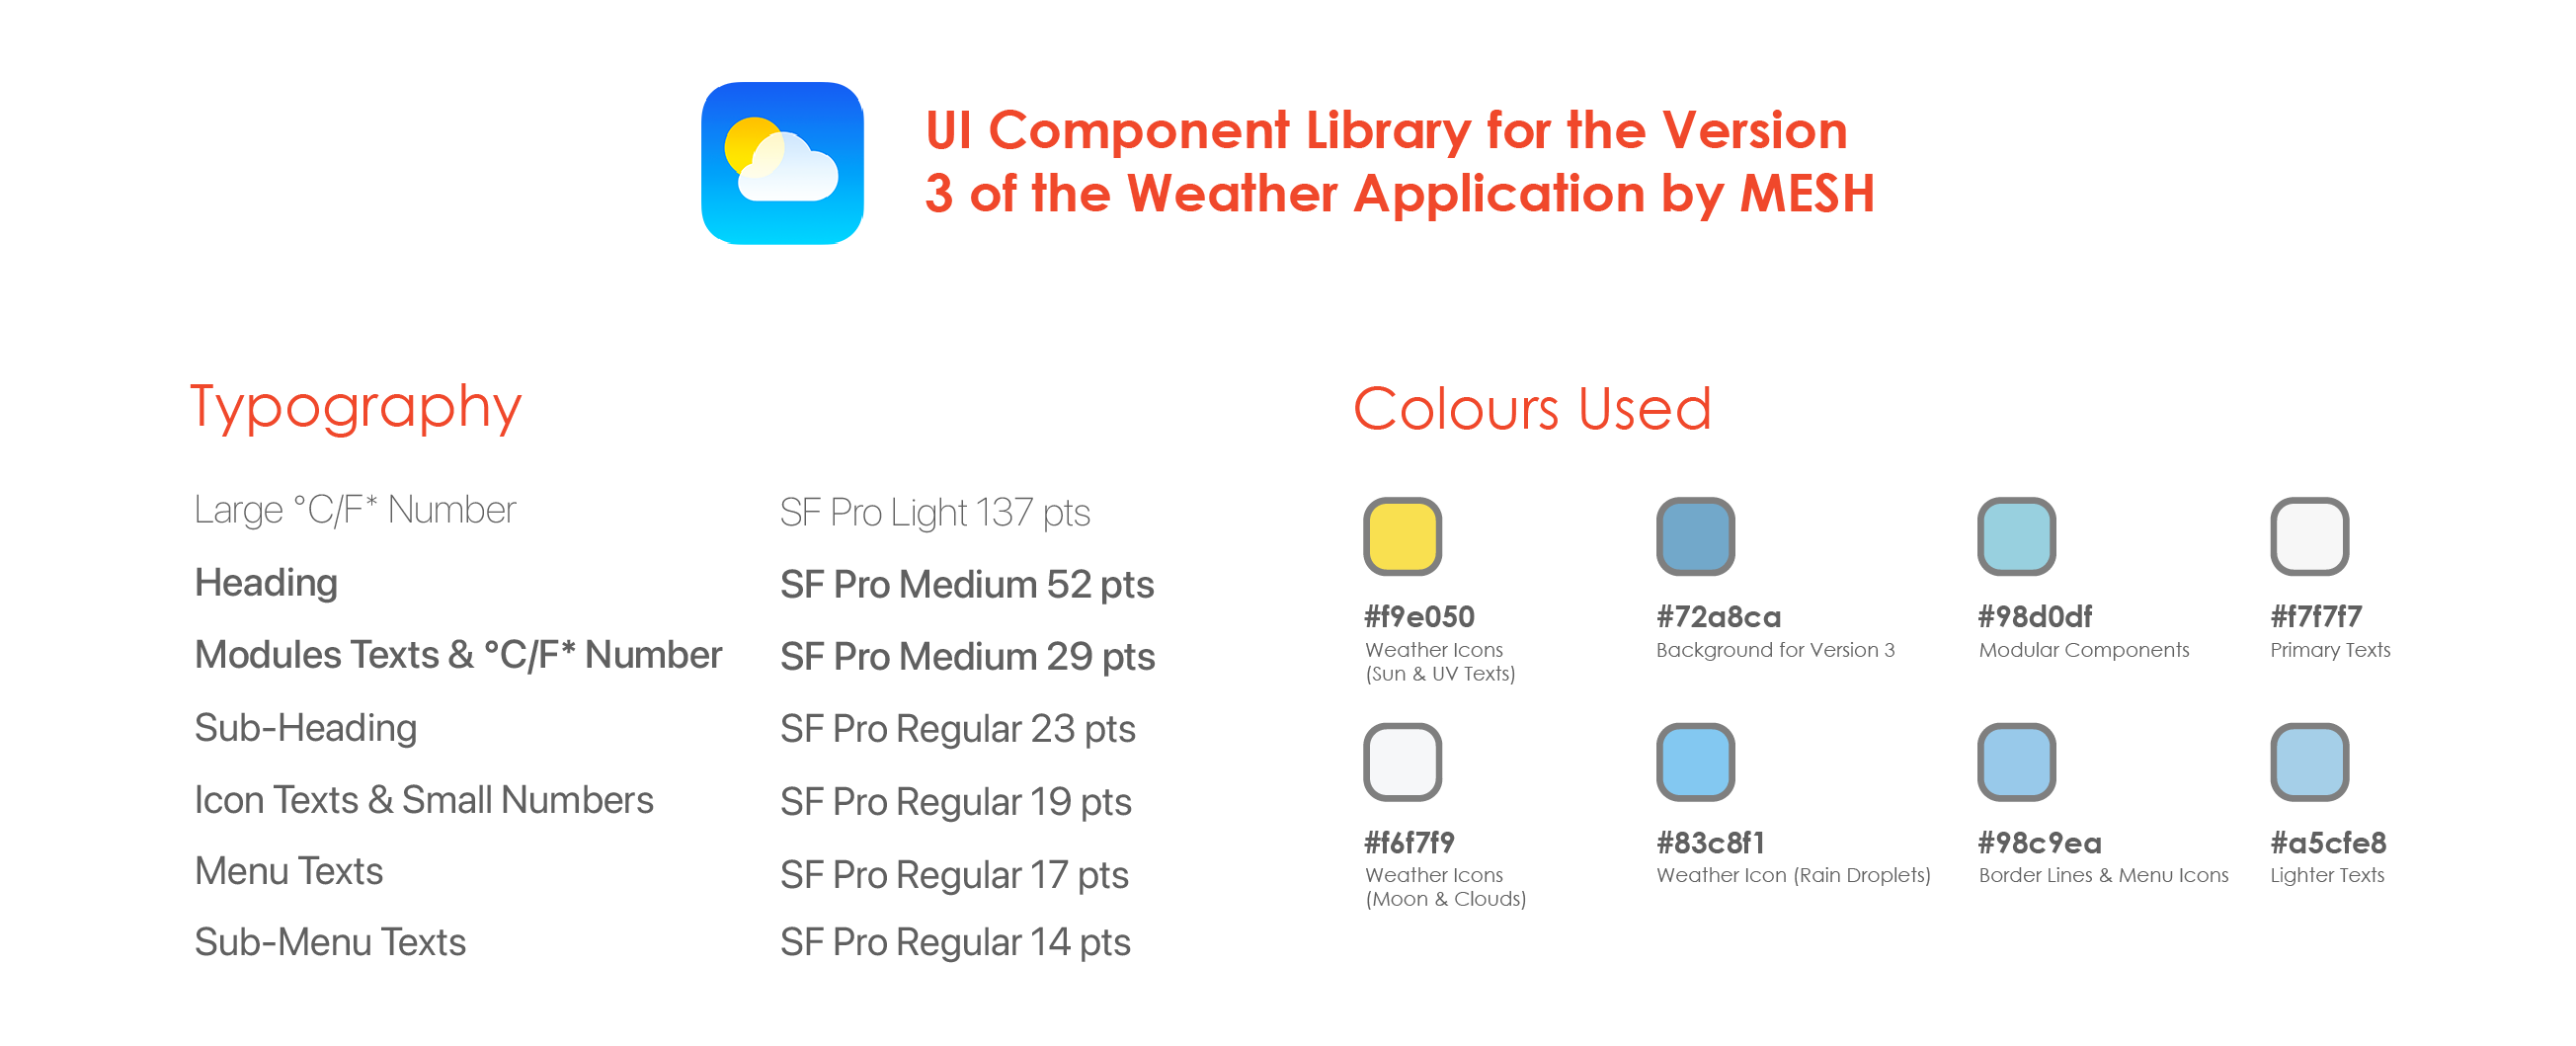 ©-MESHart.ca-2021-Nimesh-Devkota-iPad Weather Application User Interface UI Component Library Hexacode Colours & Texts No-Copying-Without-Explicit-Permission-01